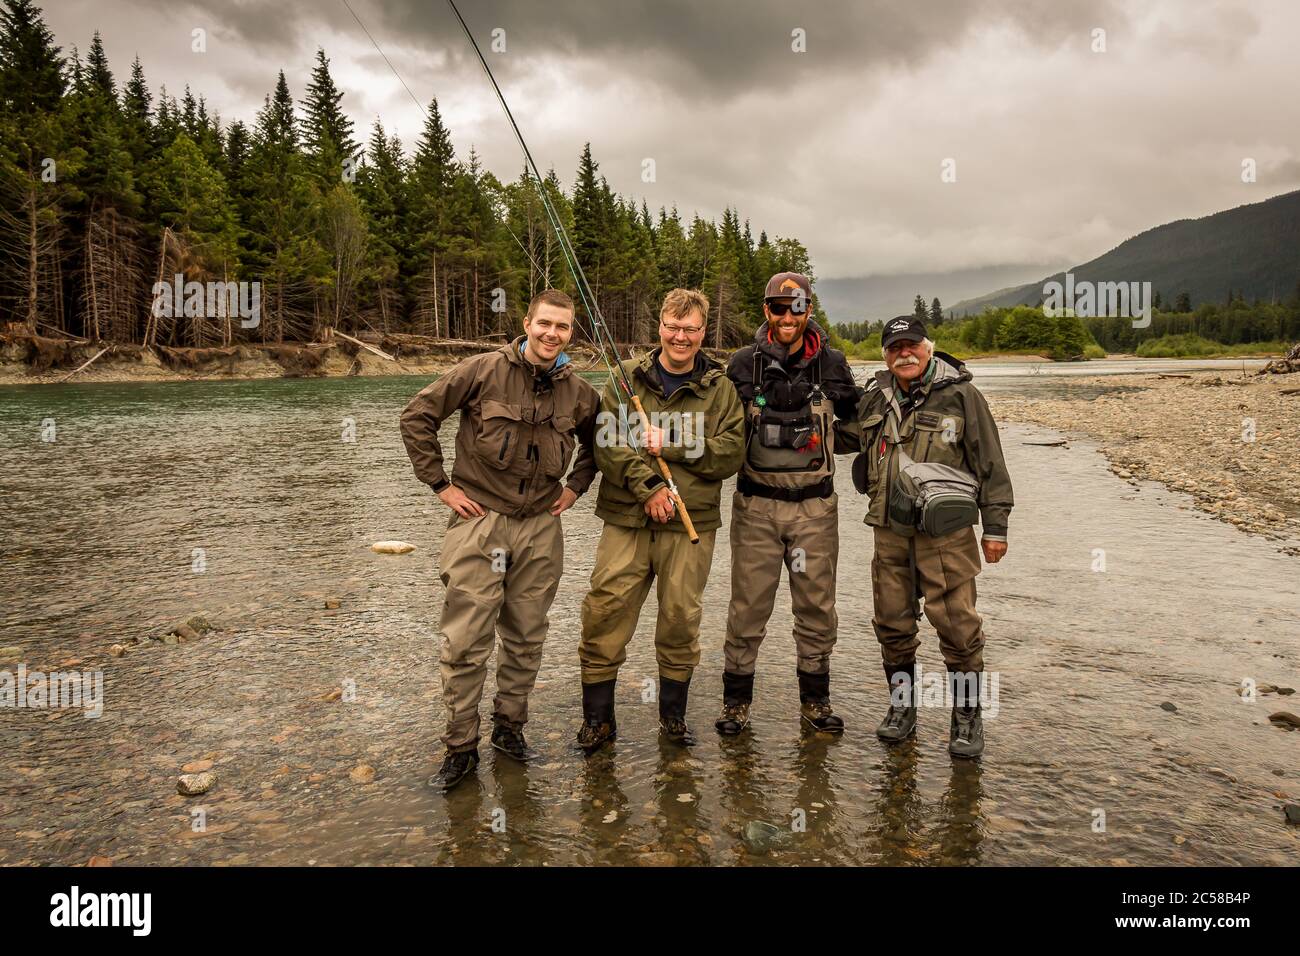 A happy group sport fly fisherman friends on a beautiful river scene in British Columbia, Canada Stock Photo